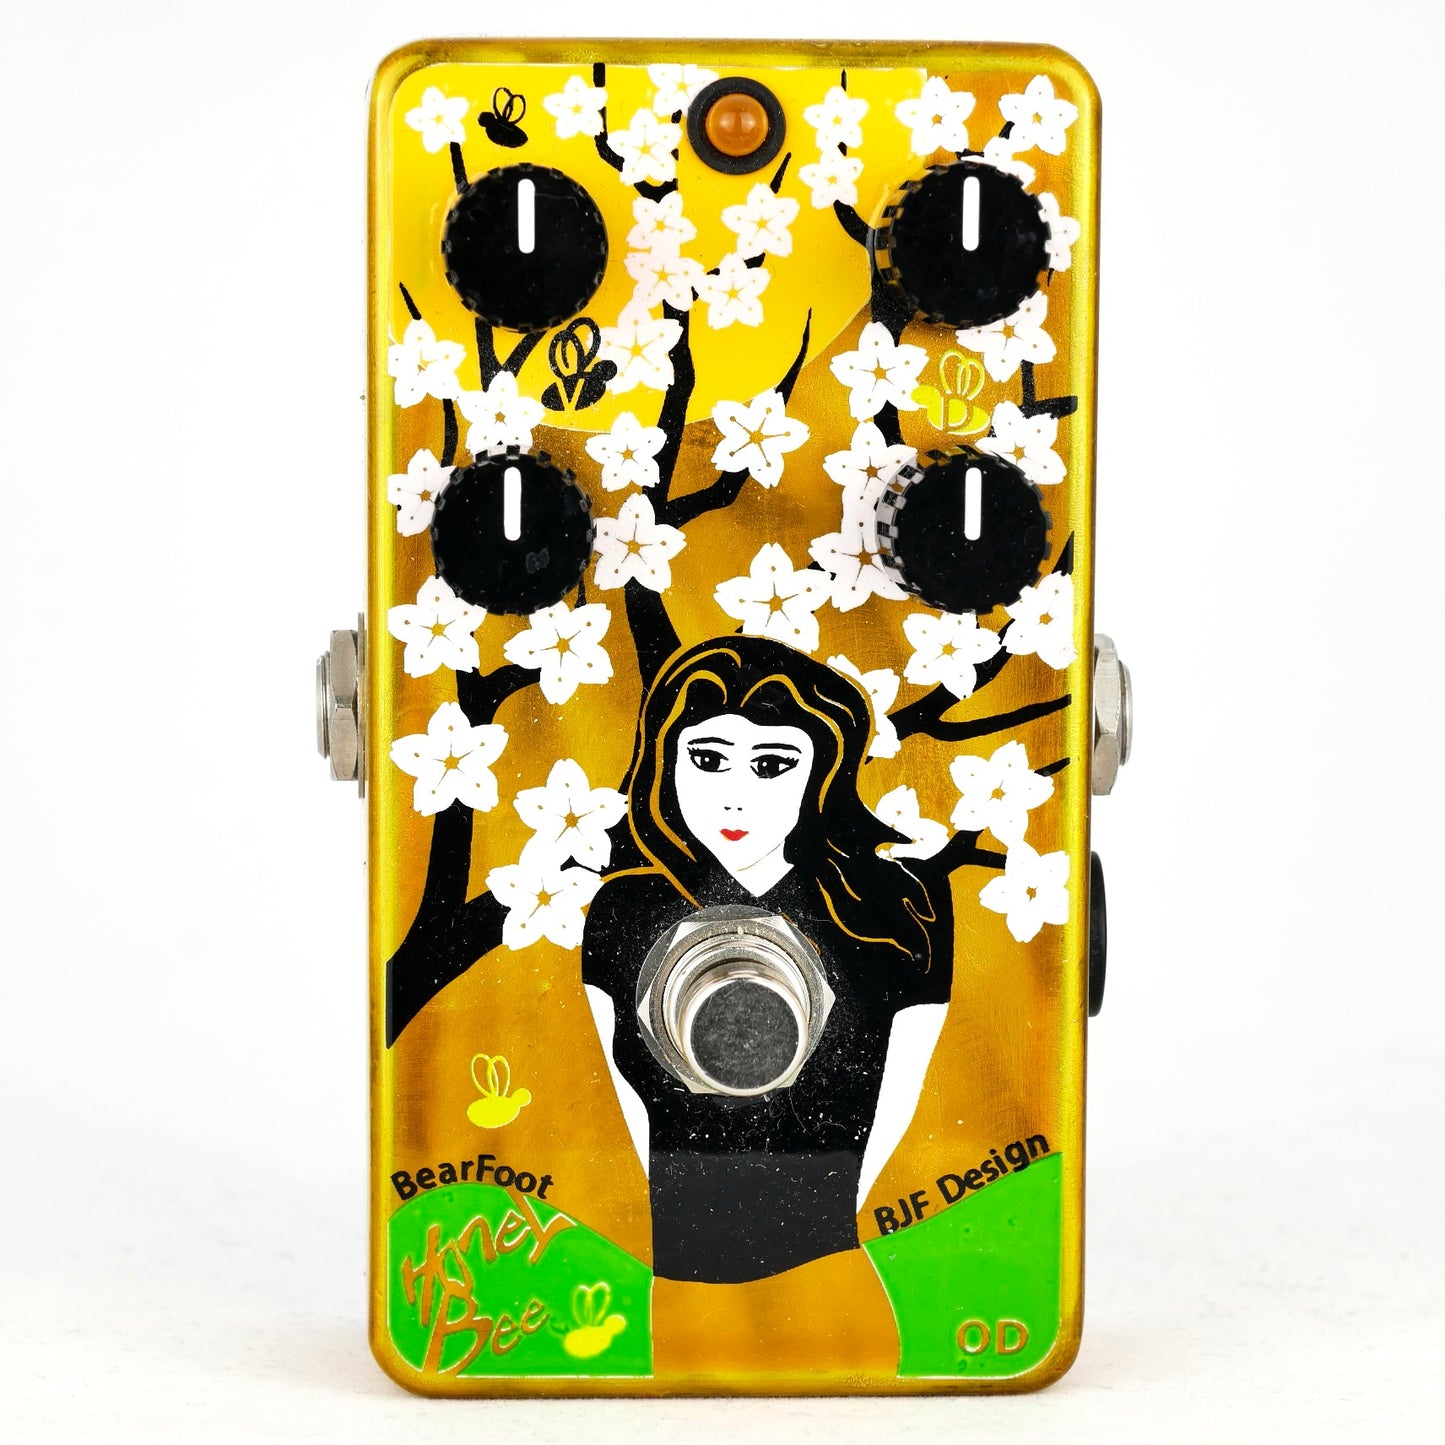 Bearfoot FX Honey Bee OD - Limited Edition Hand Painted